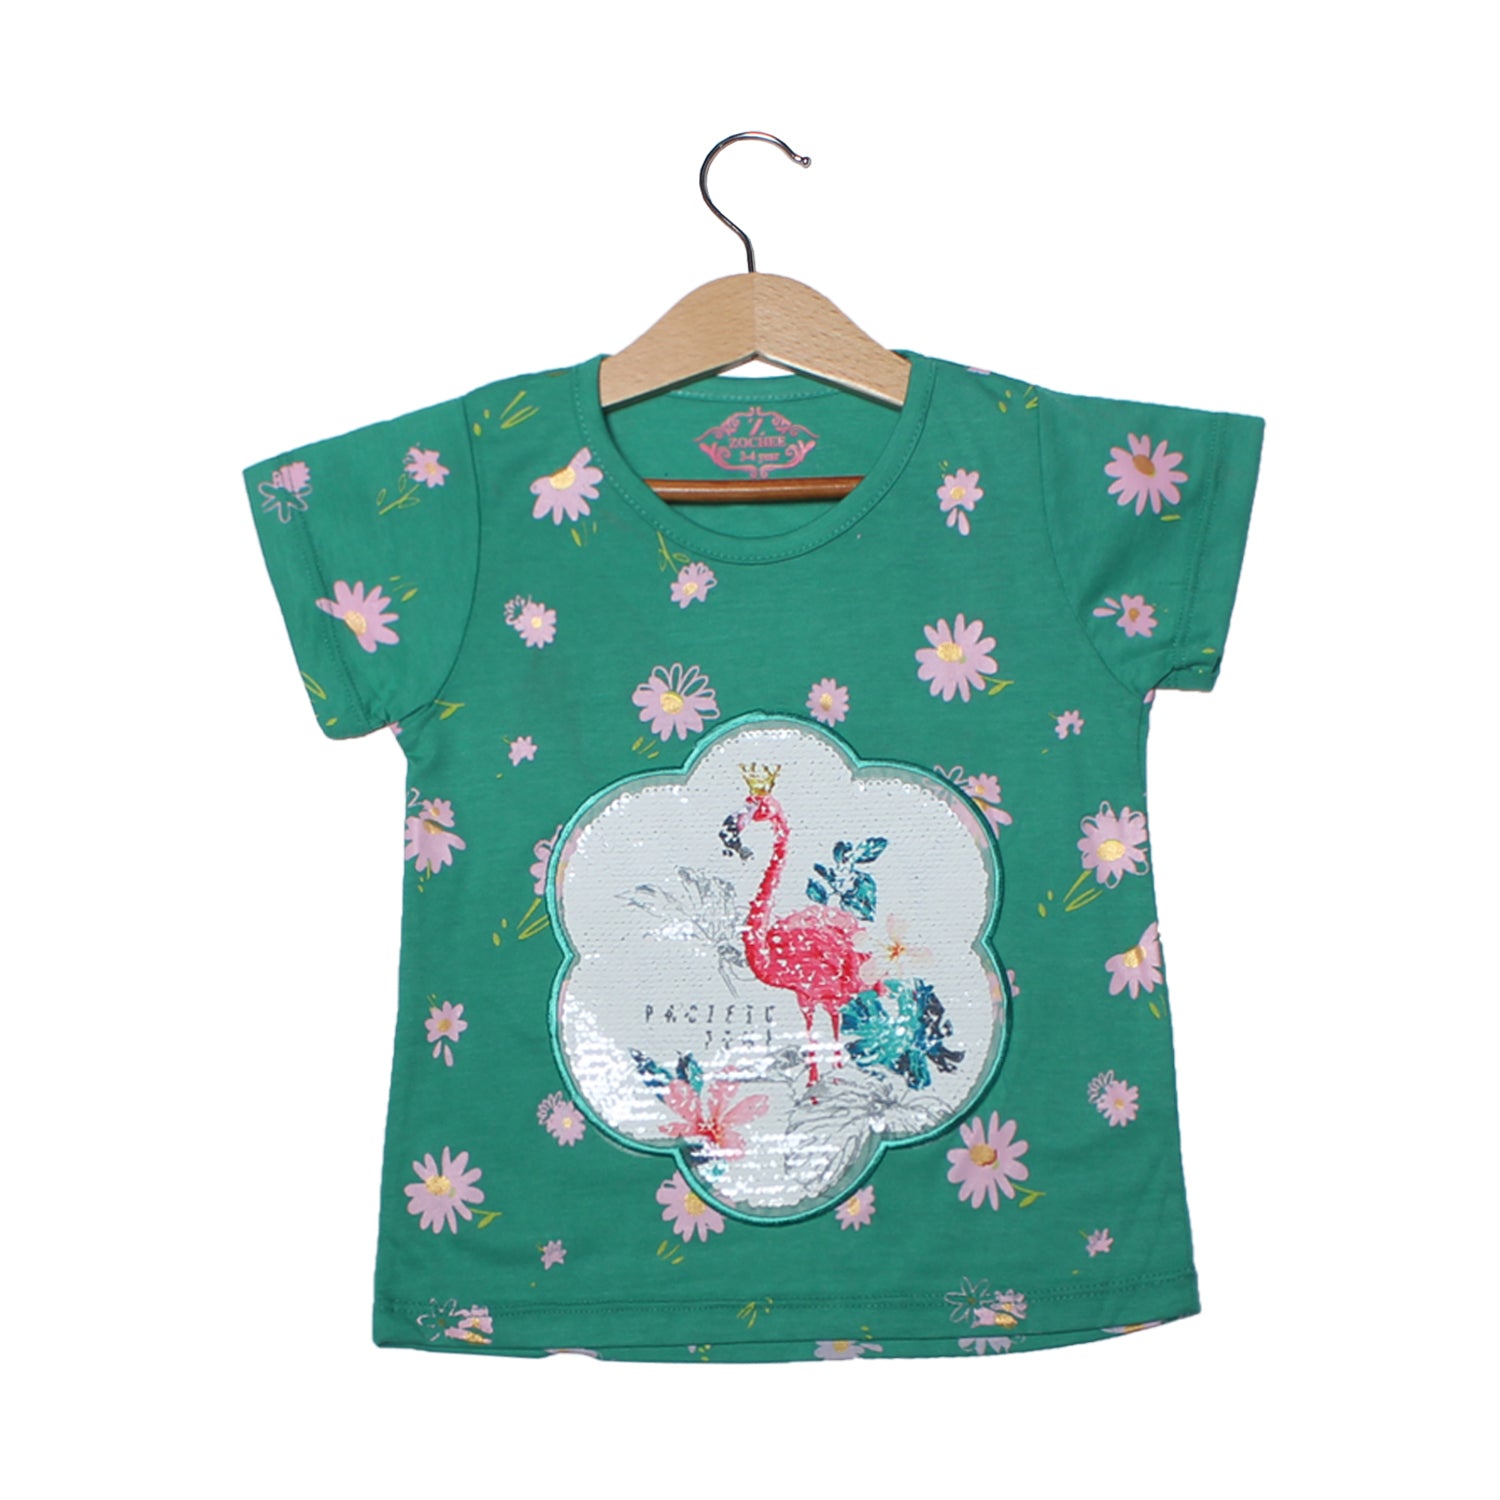 NEW GREEN FLOWER PATCH PRINTED T-SHIRT TOP FOR GIRLS